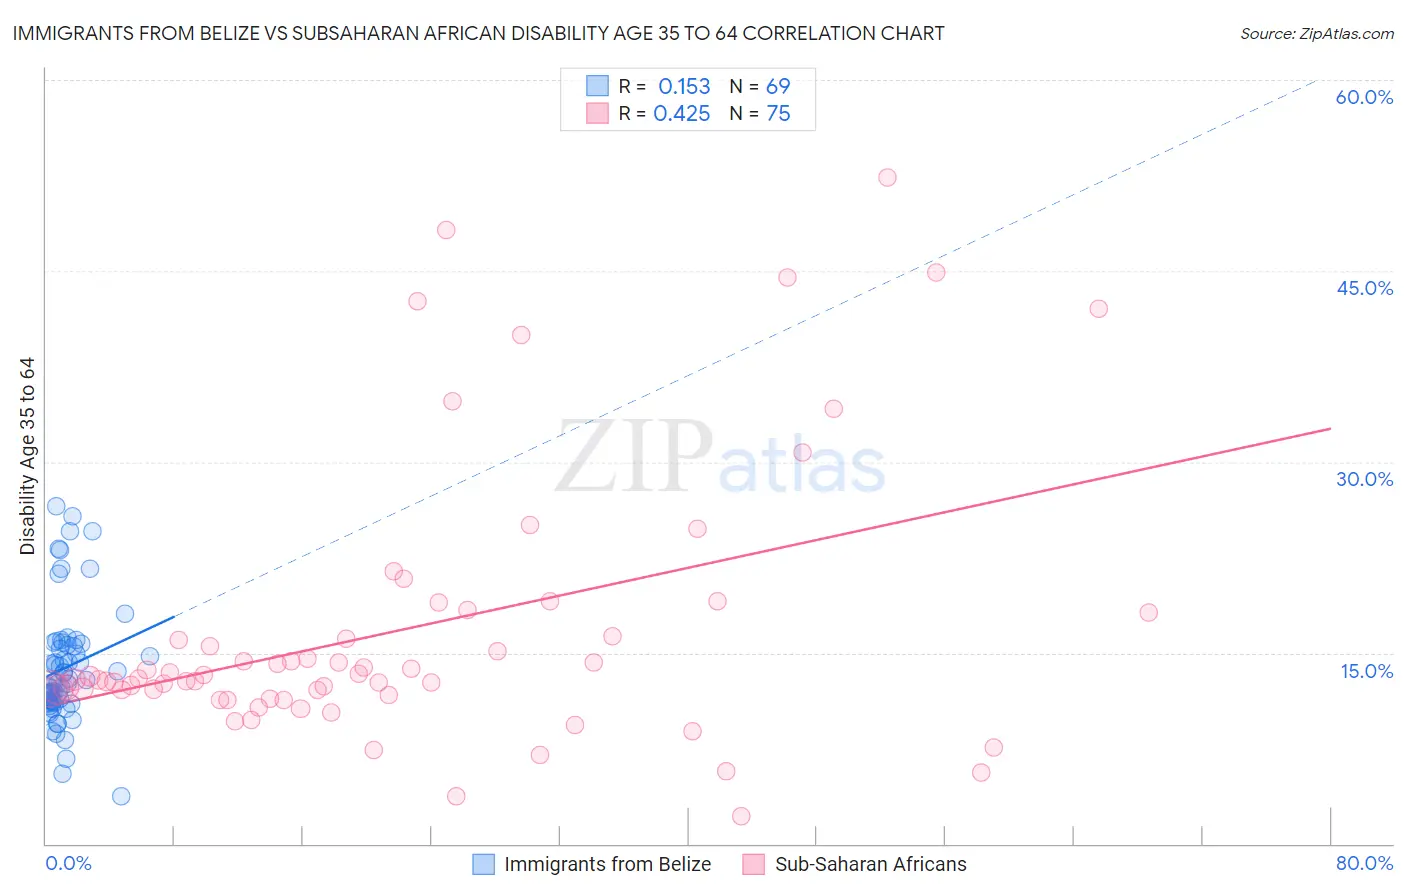 Immigrants from Belize vs Subsaharan African Disability Age 35 to 64